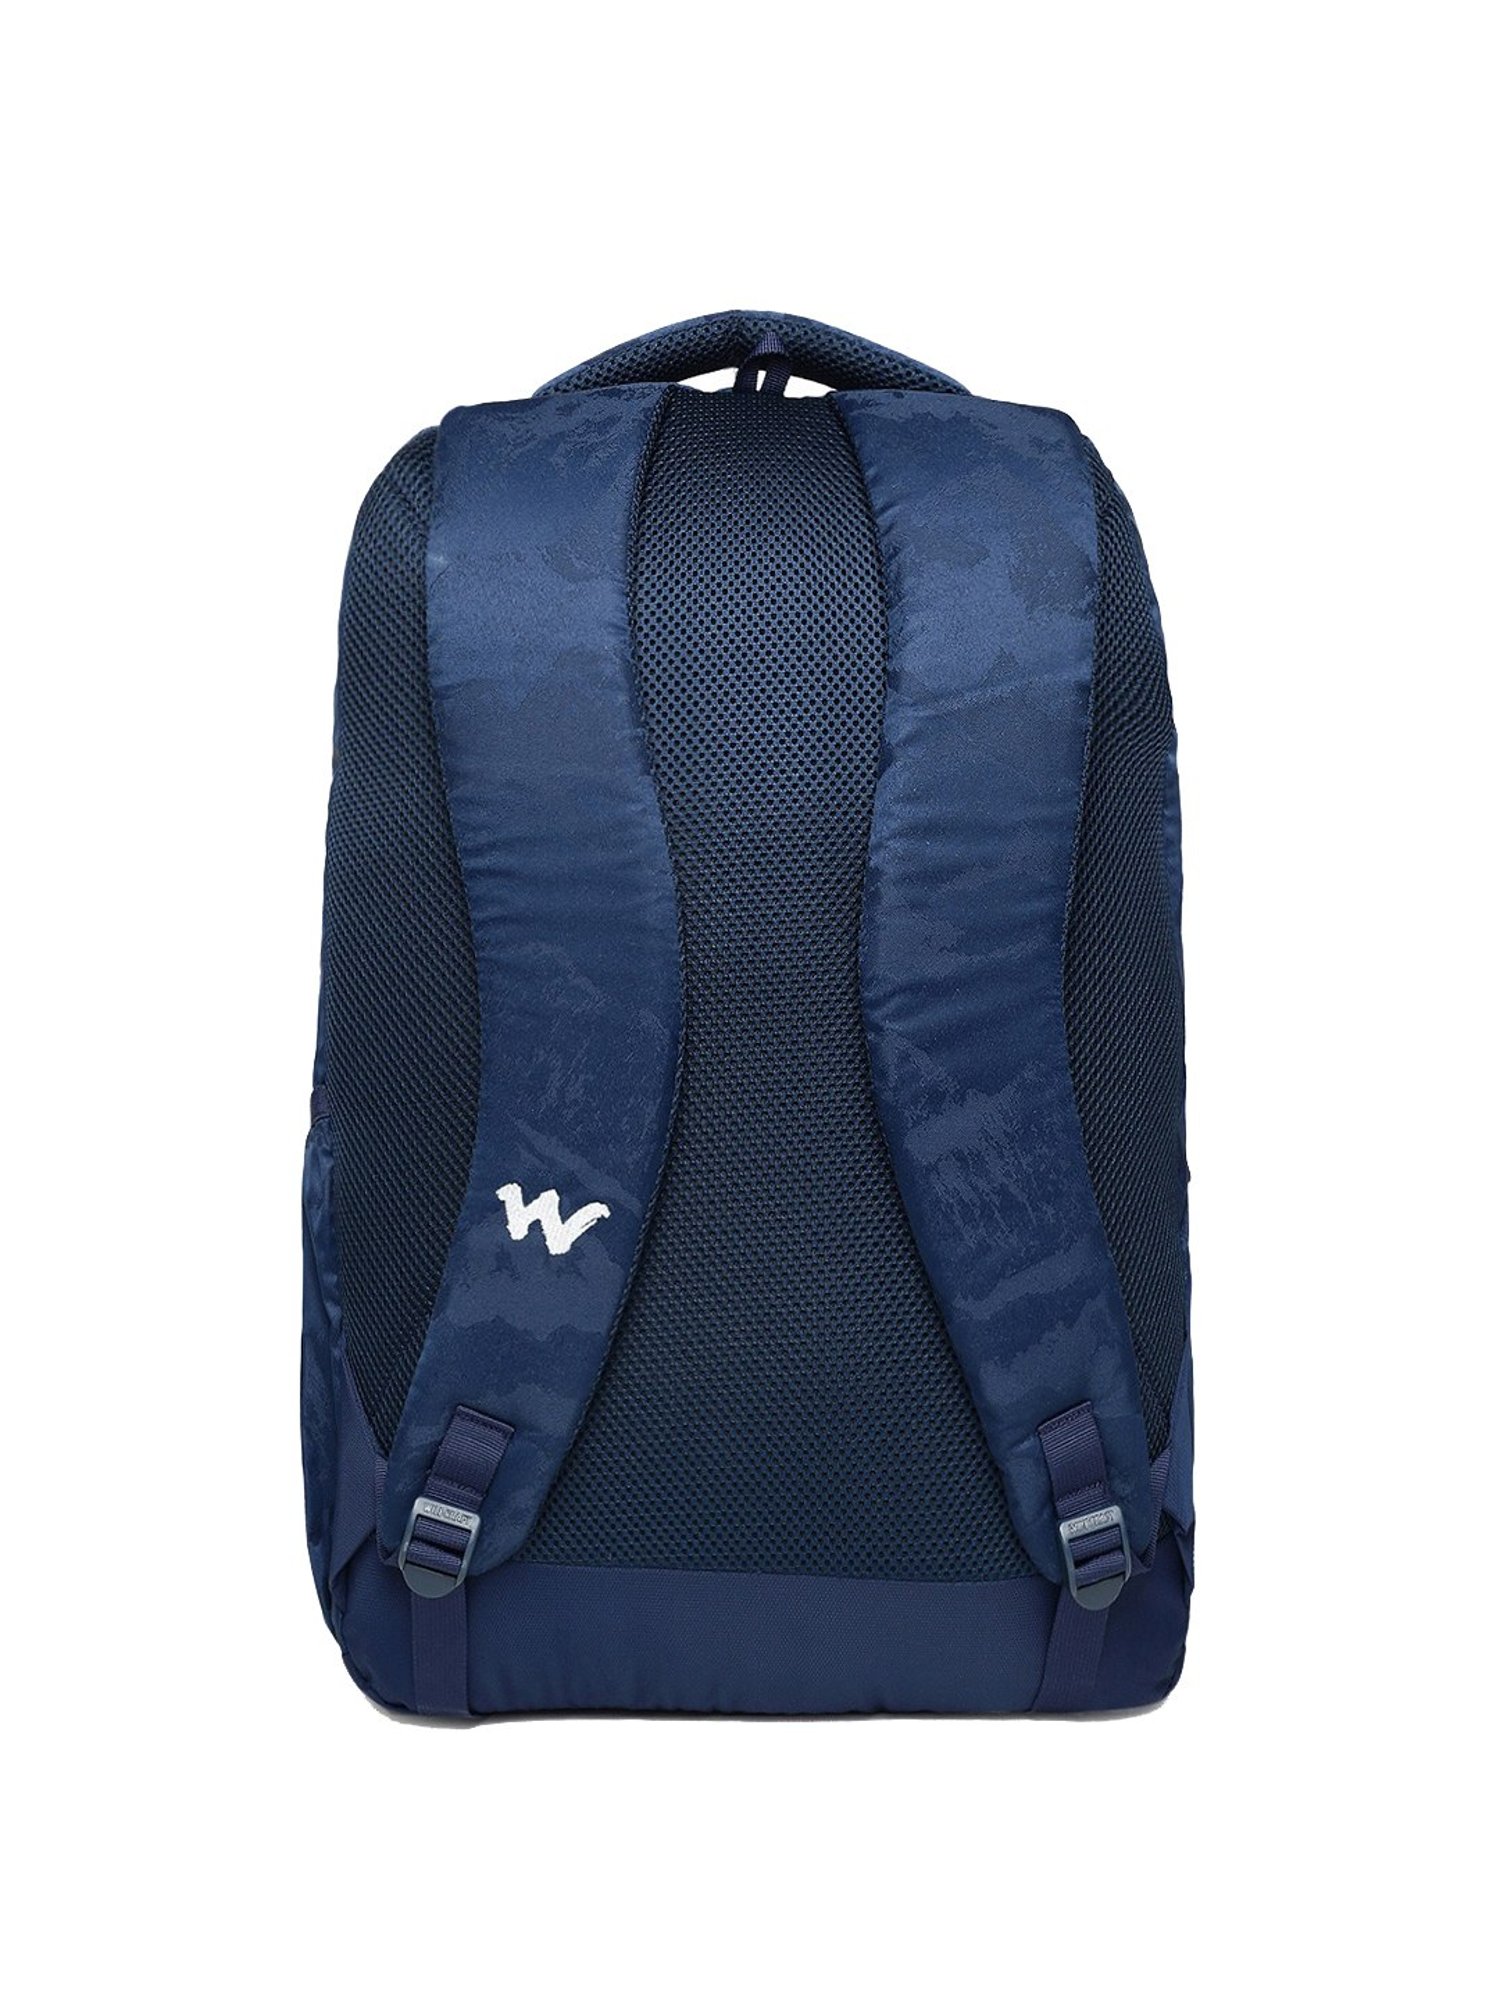 Buy Wildcraft Beatbox 32 L Laptop Backpack - Blue Online - Backpacks -  Backpacks - Discontinued - Pepperfry Product